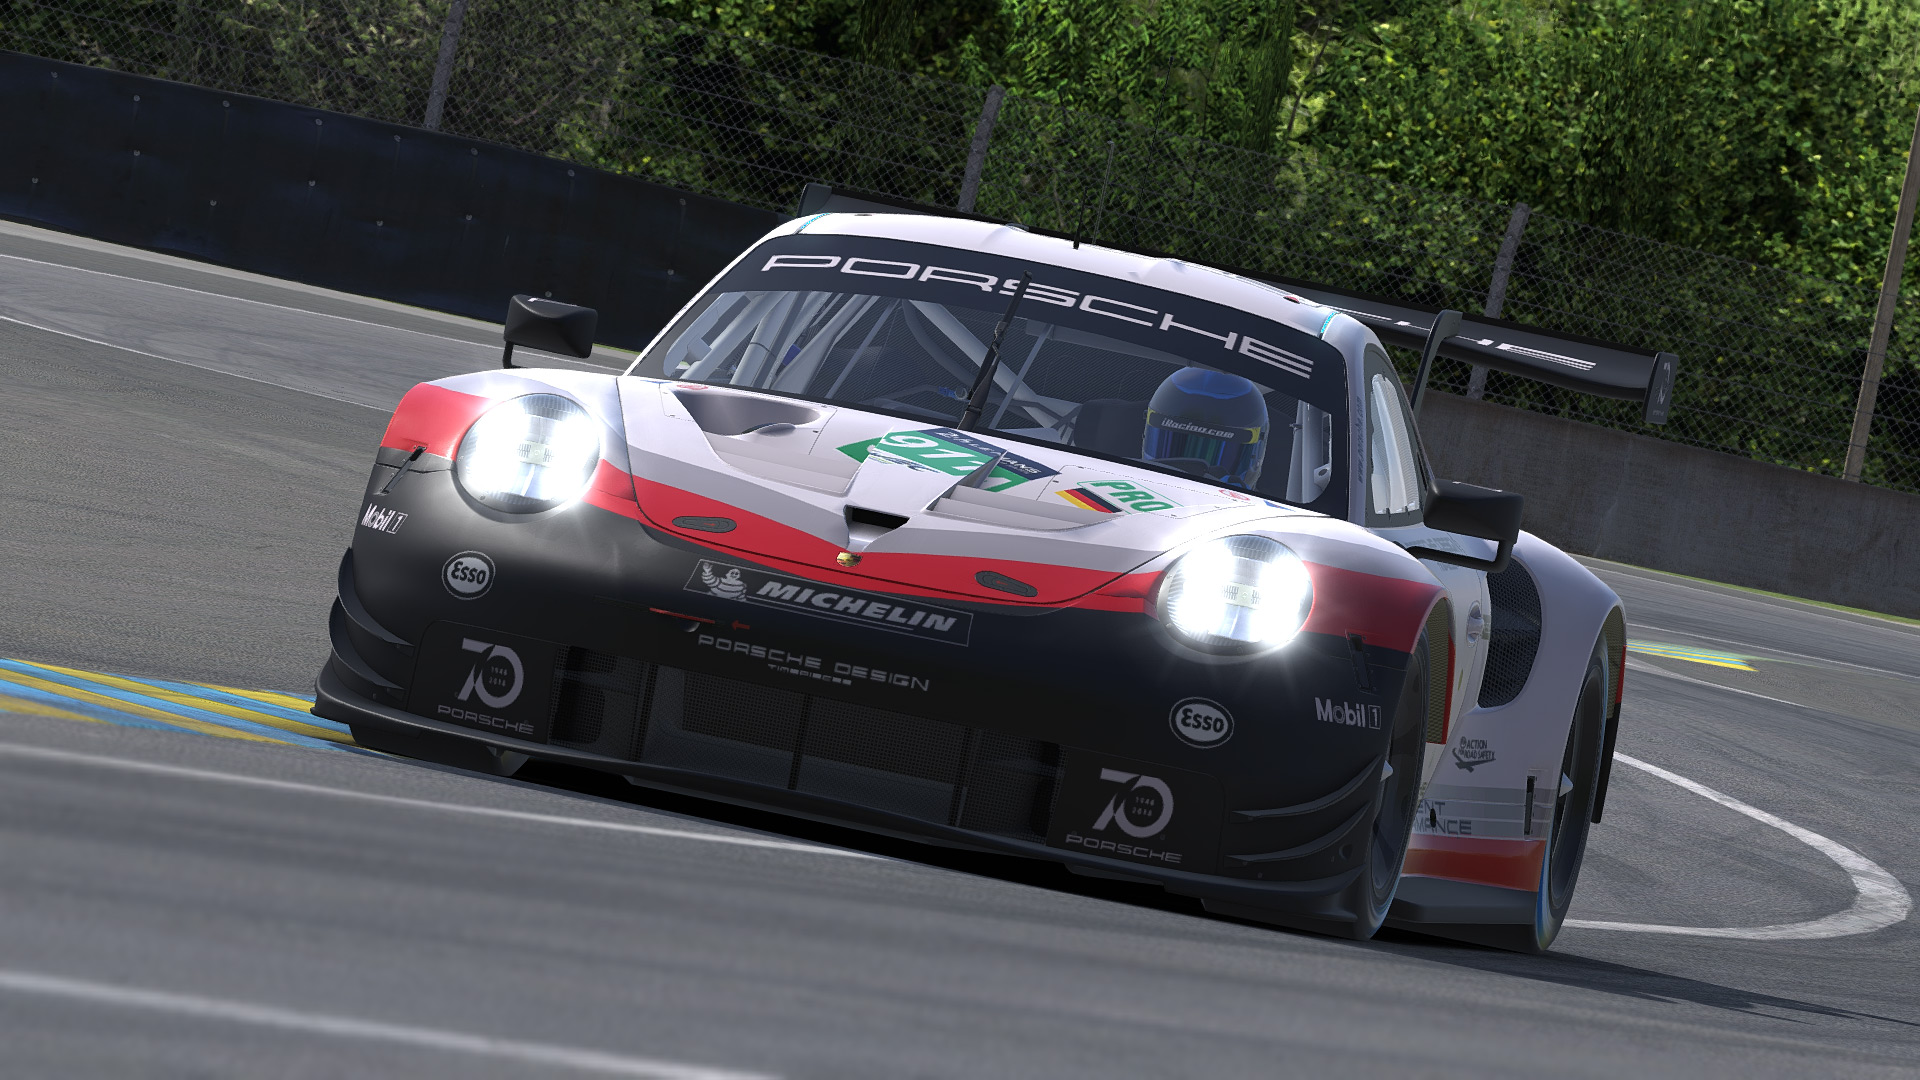 A silver, red and black Porsche races down a track with trees in the background